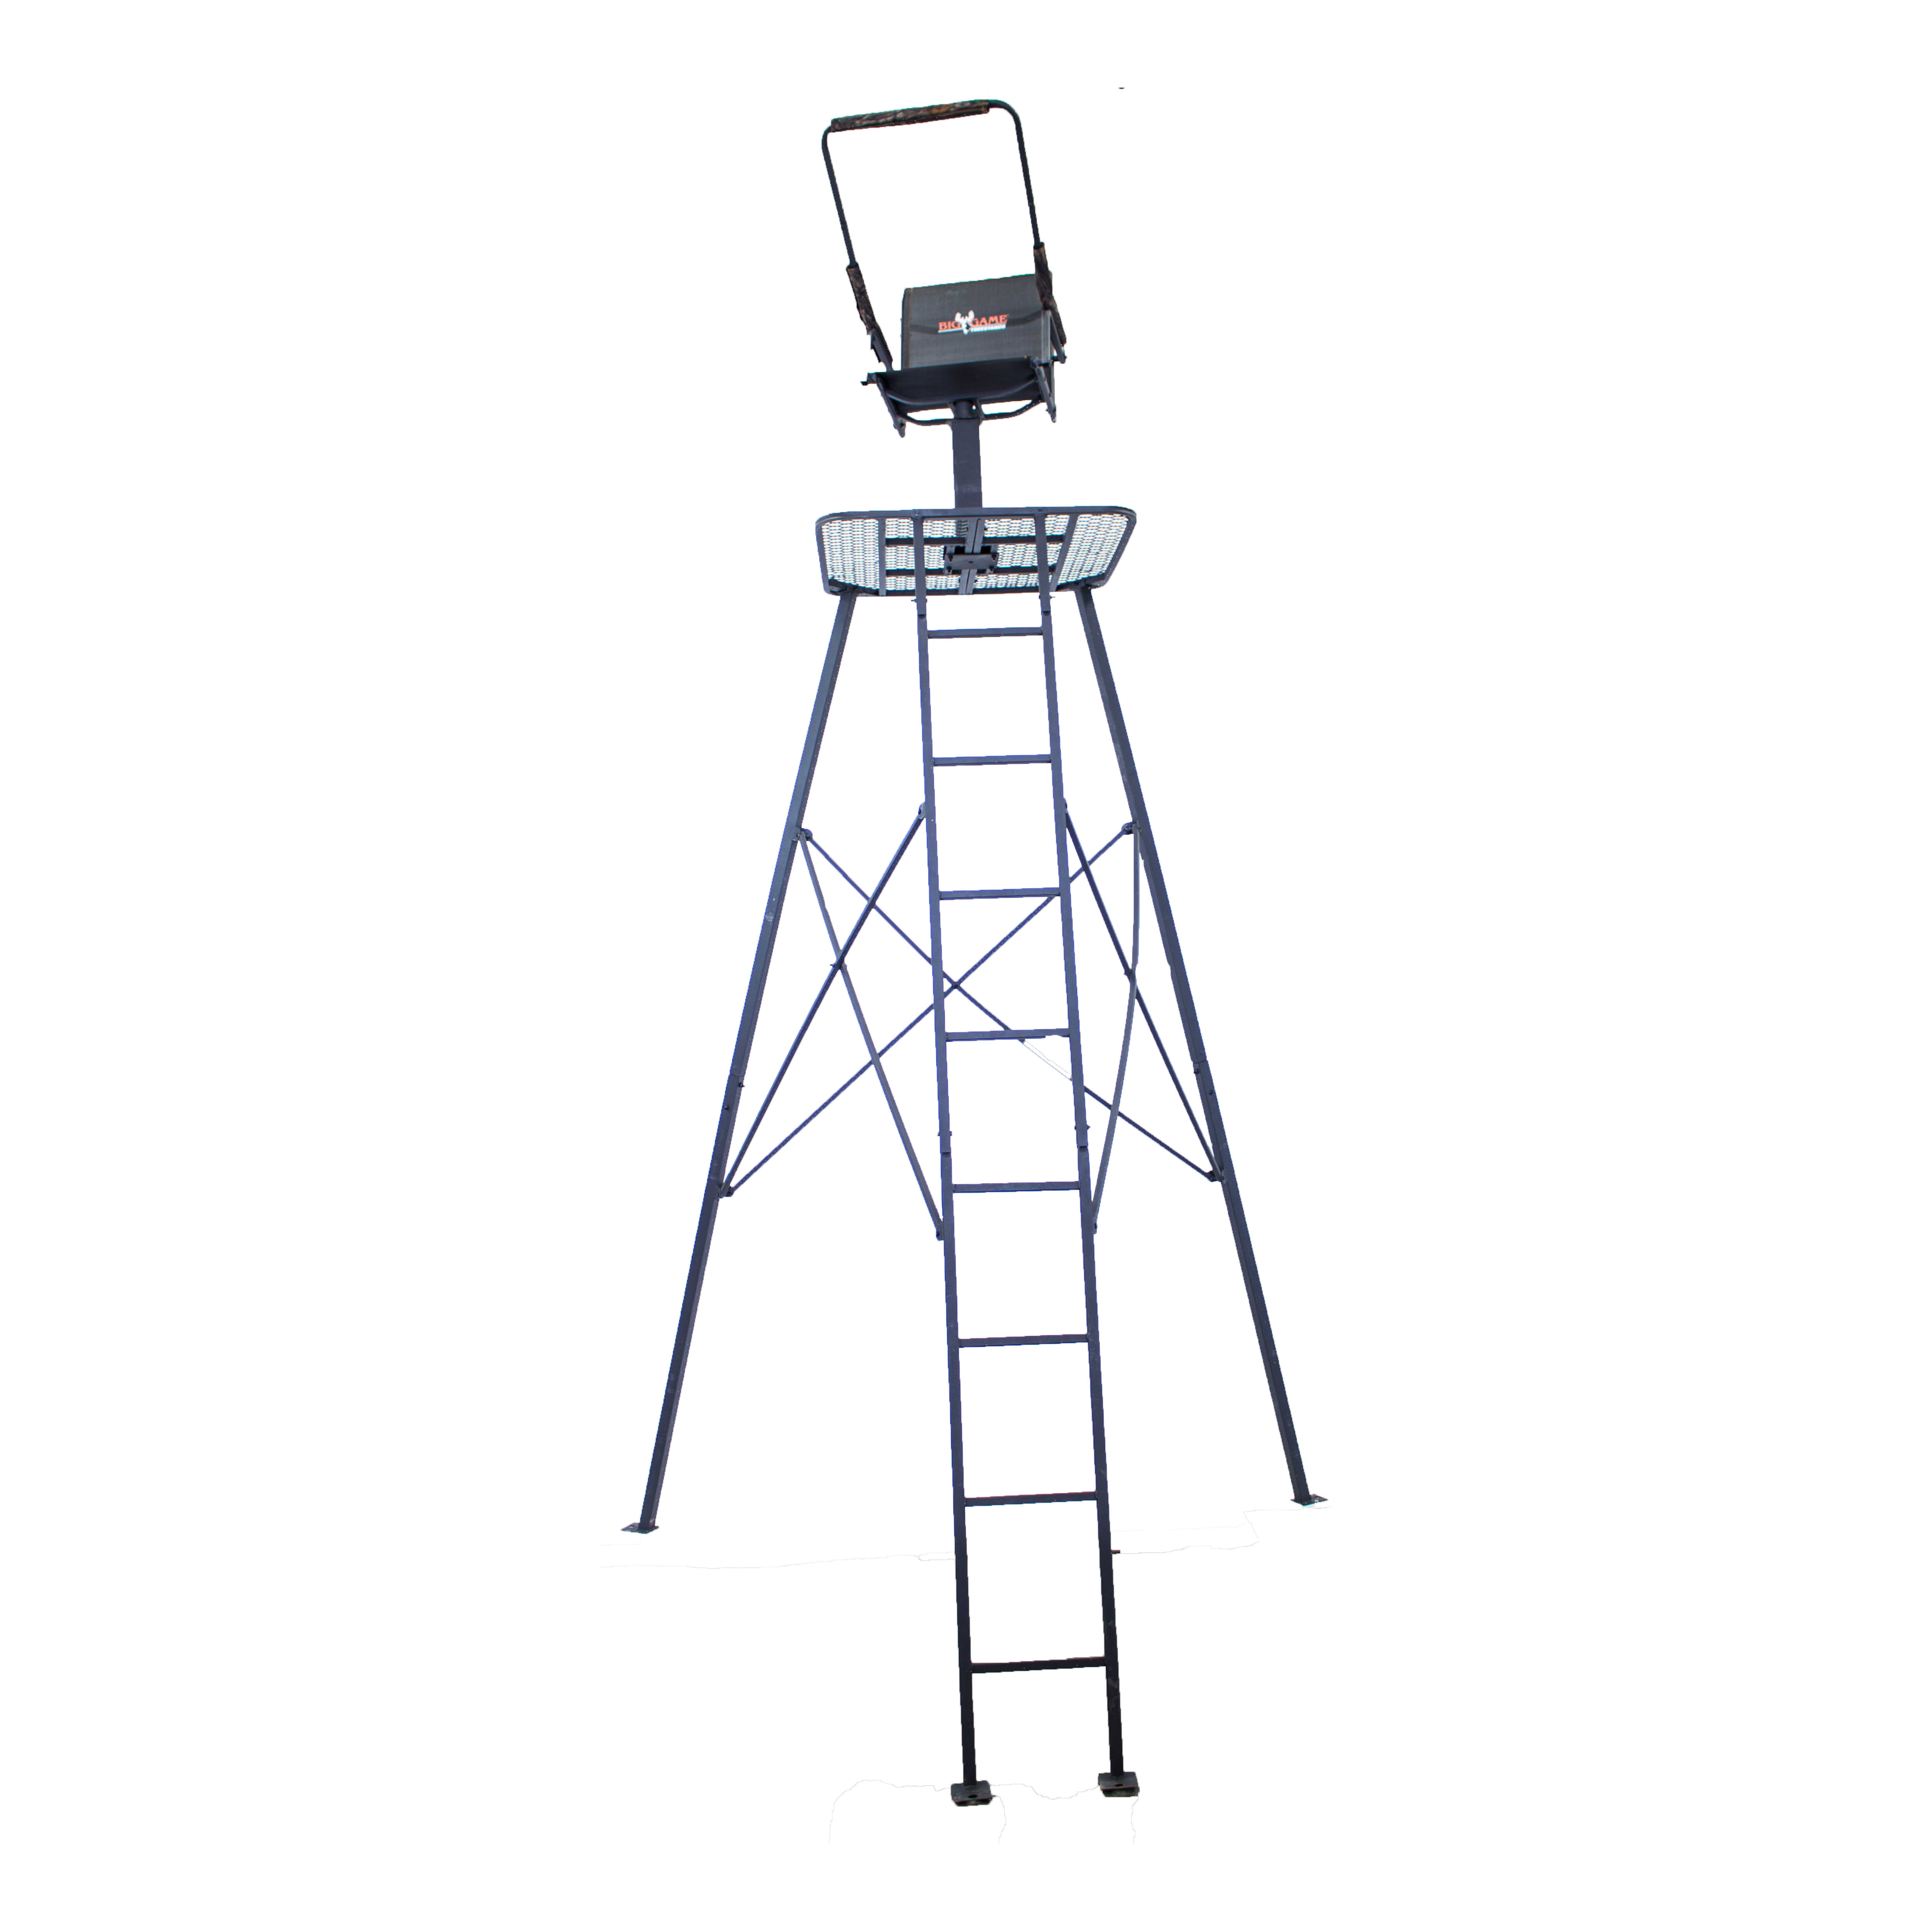 Big Game The Defender Tripod Stand